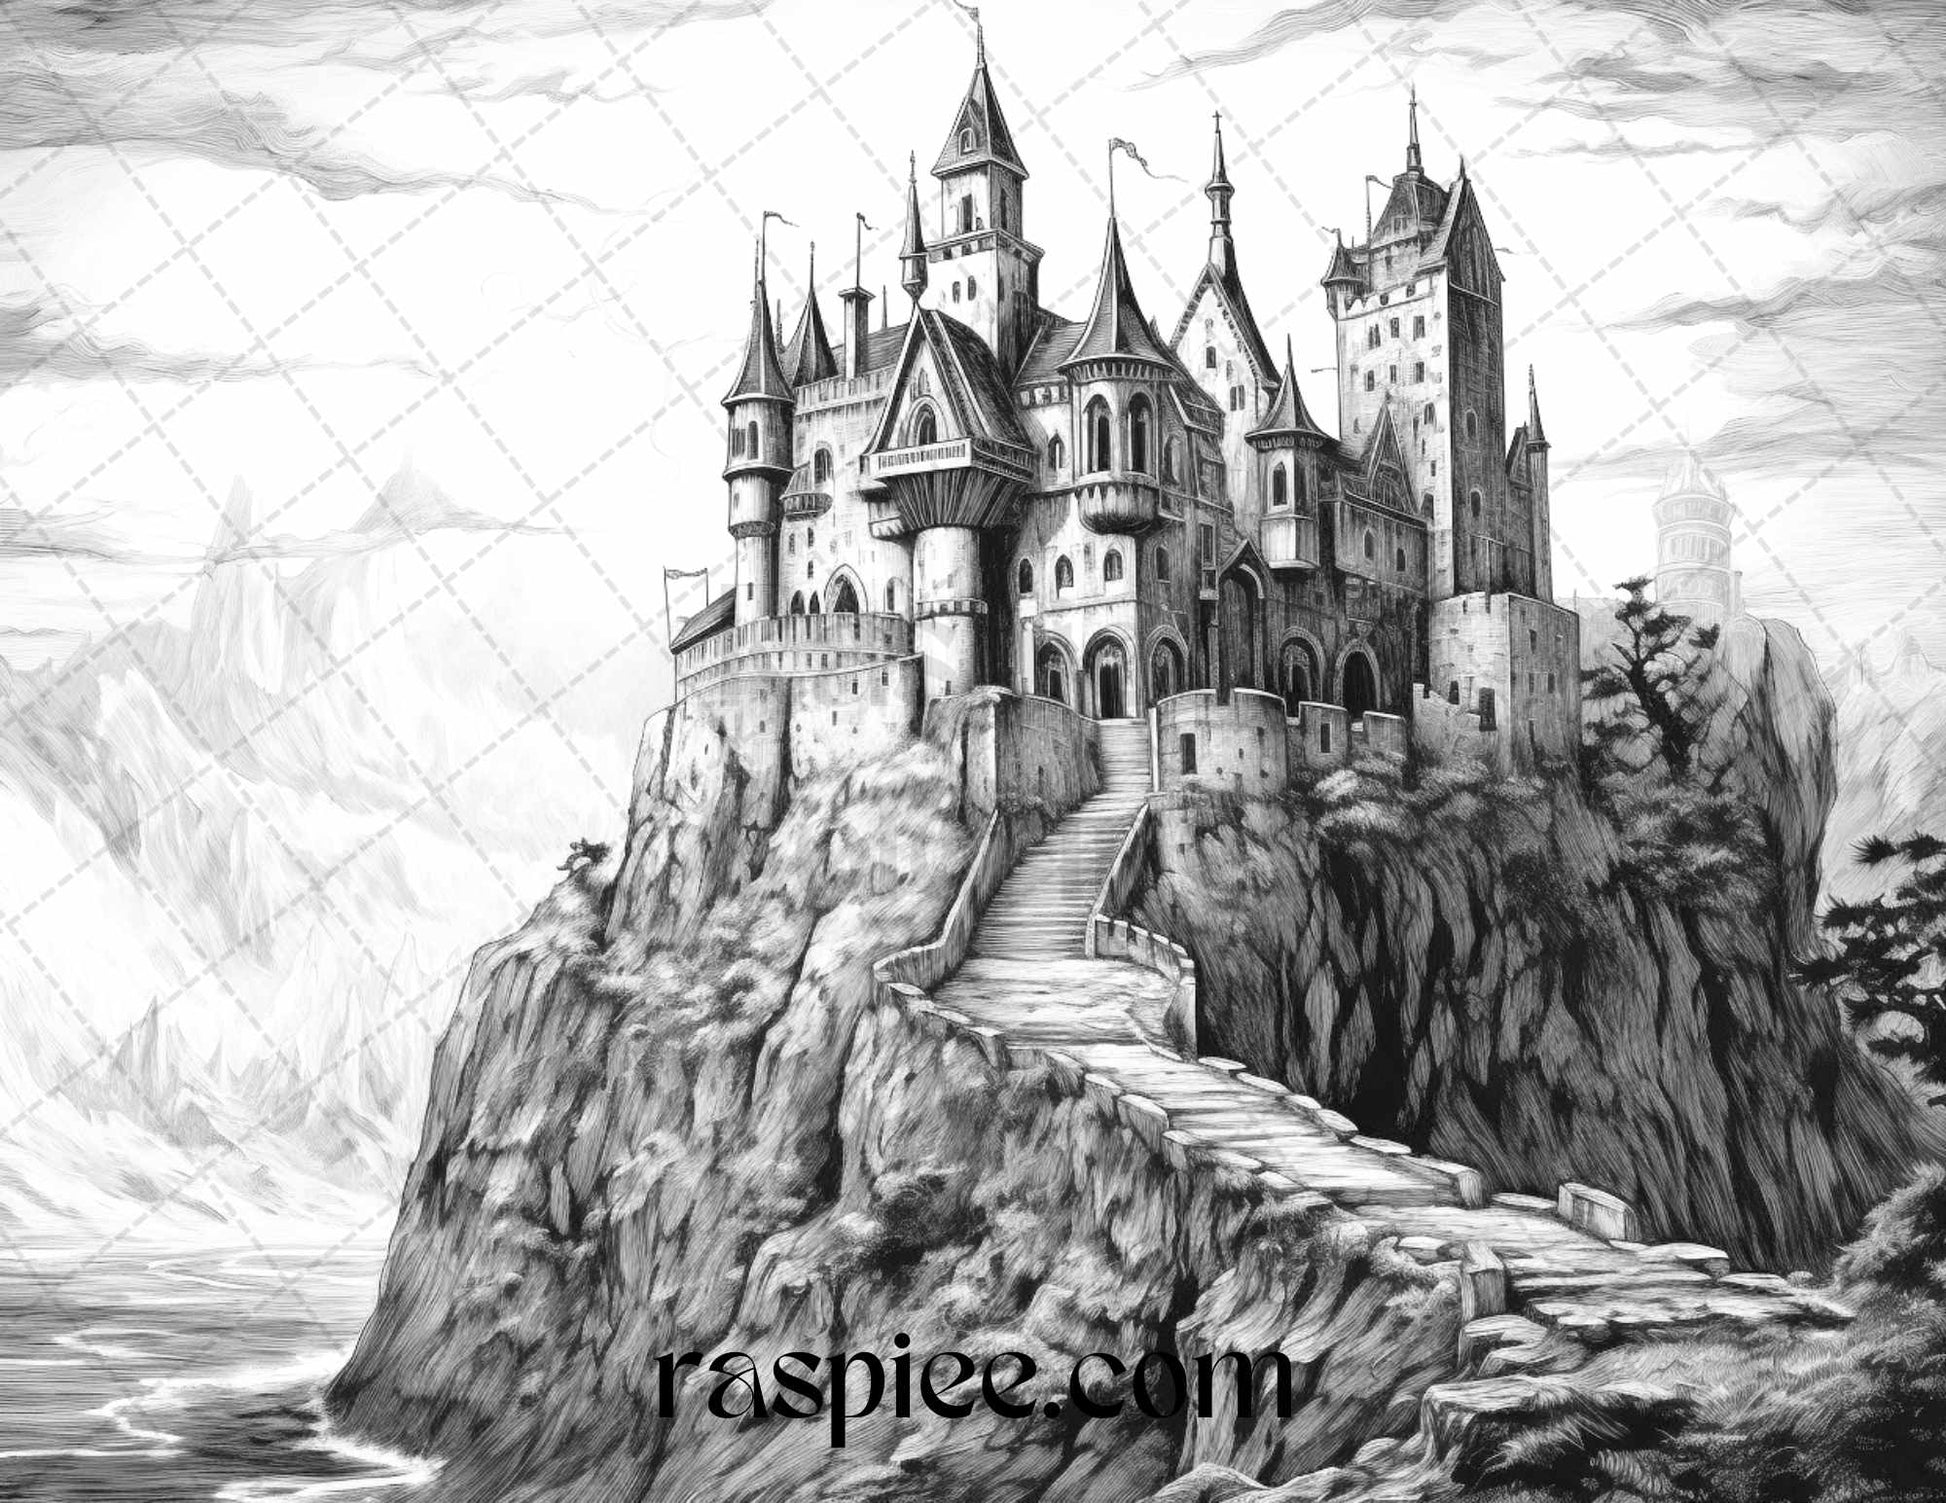 Halloween Landscape Coloring Page, Grayscale Witchcraft Coloring Printable, Spooky Autumn Scene Coloring Sheet, Dark Fantasy Printable Coloring, Haunted Forest Coloring Page, Creepy October Landscape Printable, Witch and Wizard Adult Coloring, Seasonal Grayscale Coloring Page